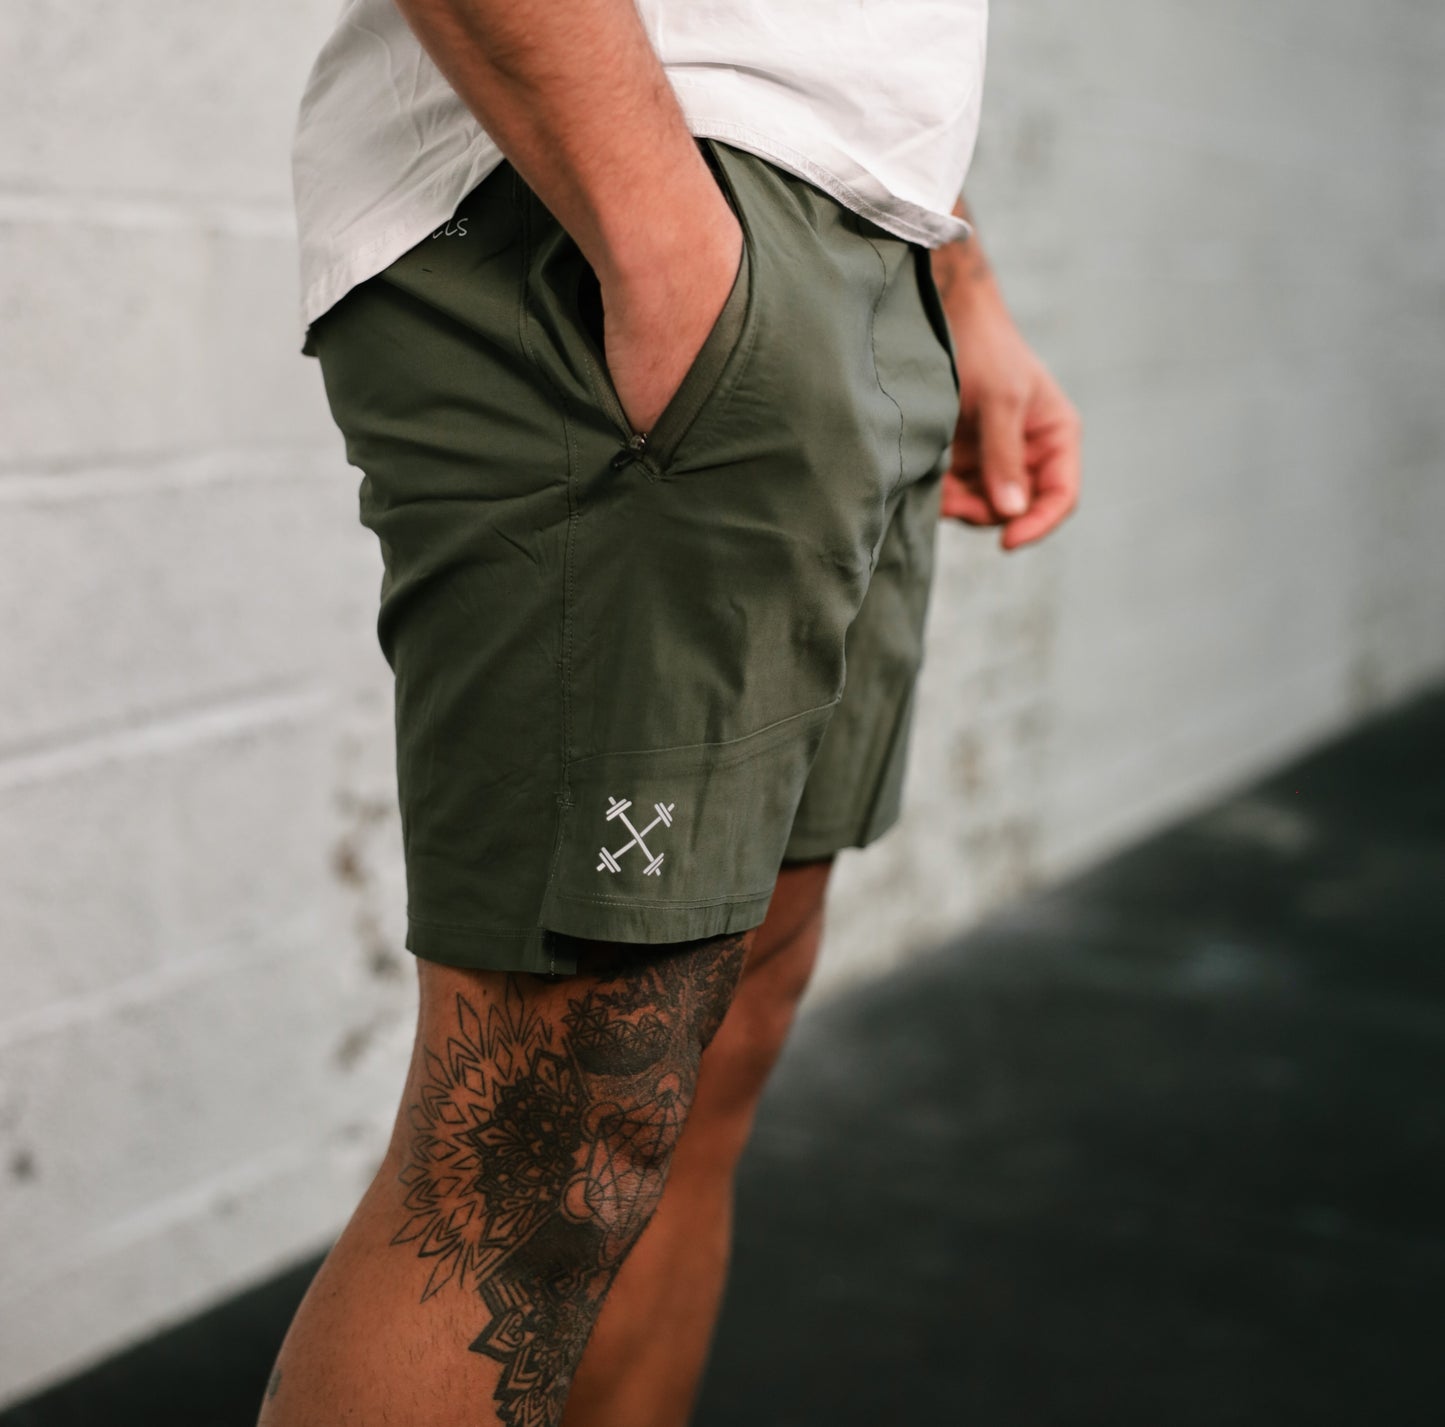 Man Competition Shorts 6"